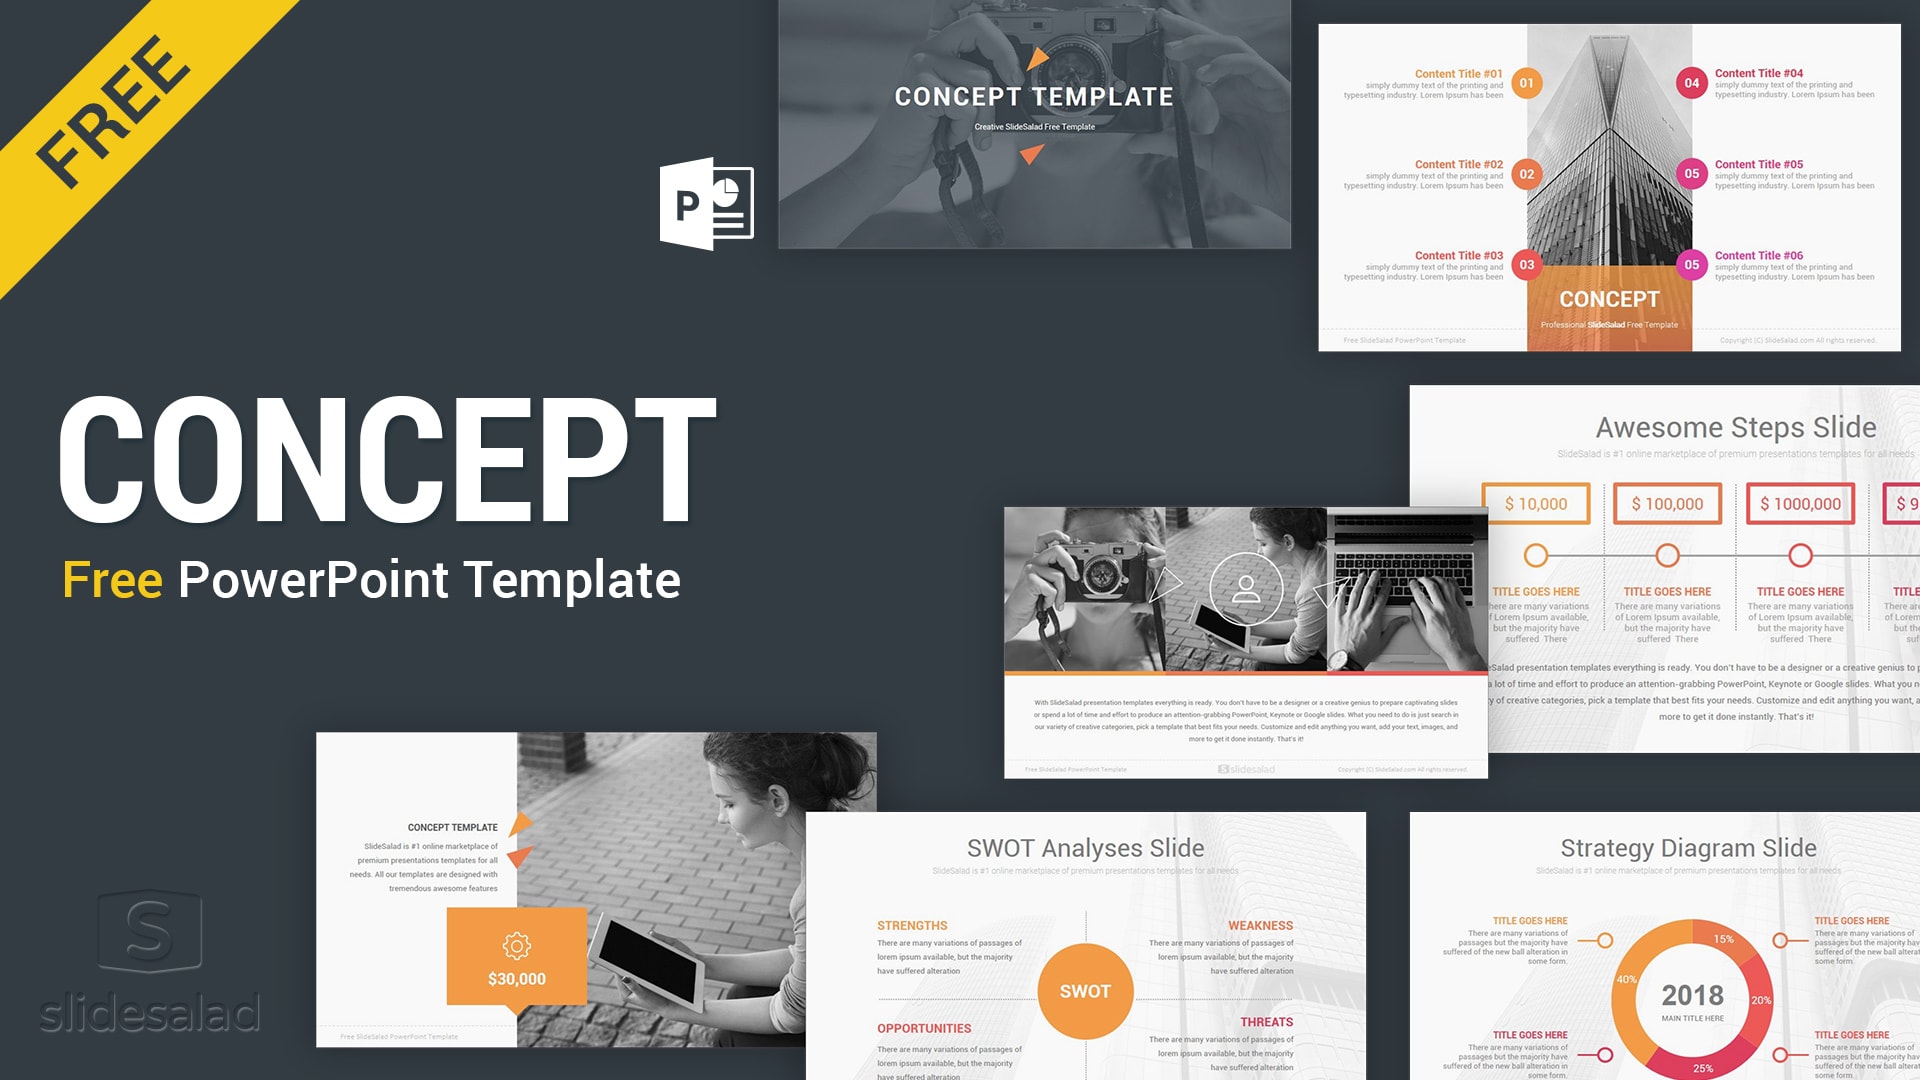 Concept Free PowerPoint Presentation Template - Free Download PPT Throughout Powerpoint Slides Design Templates For Free